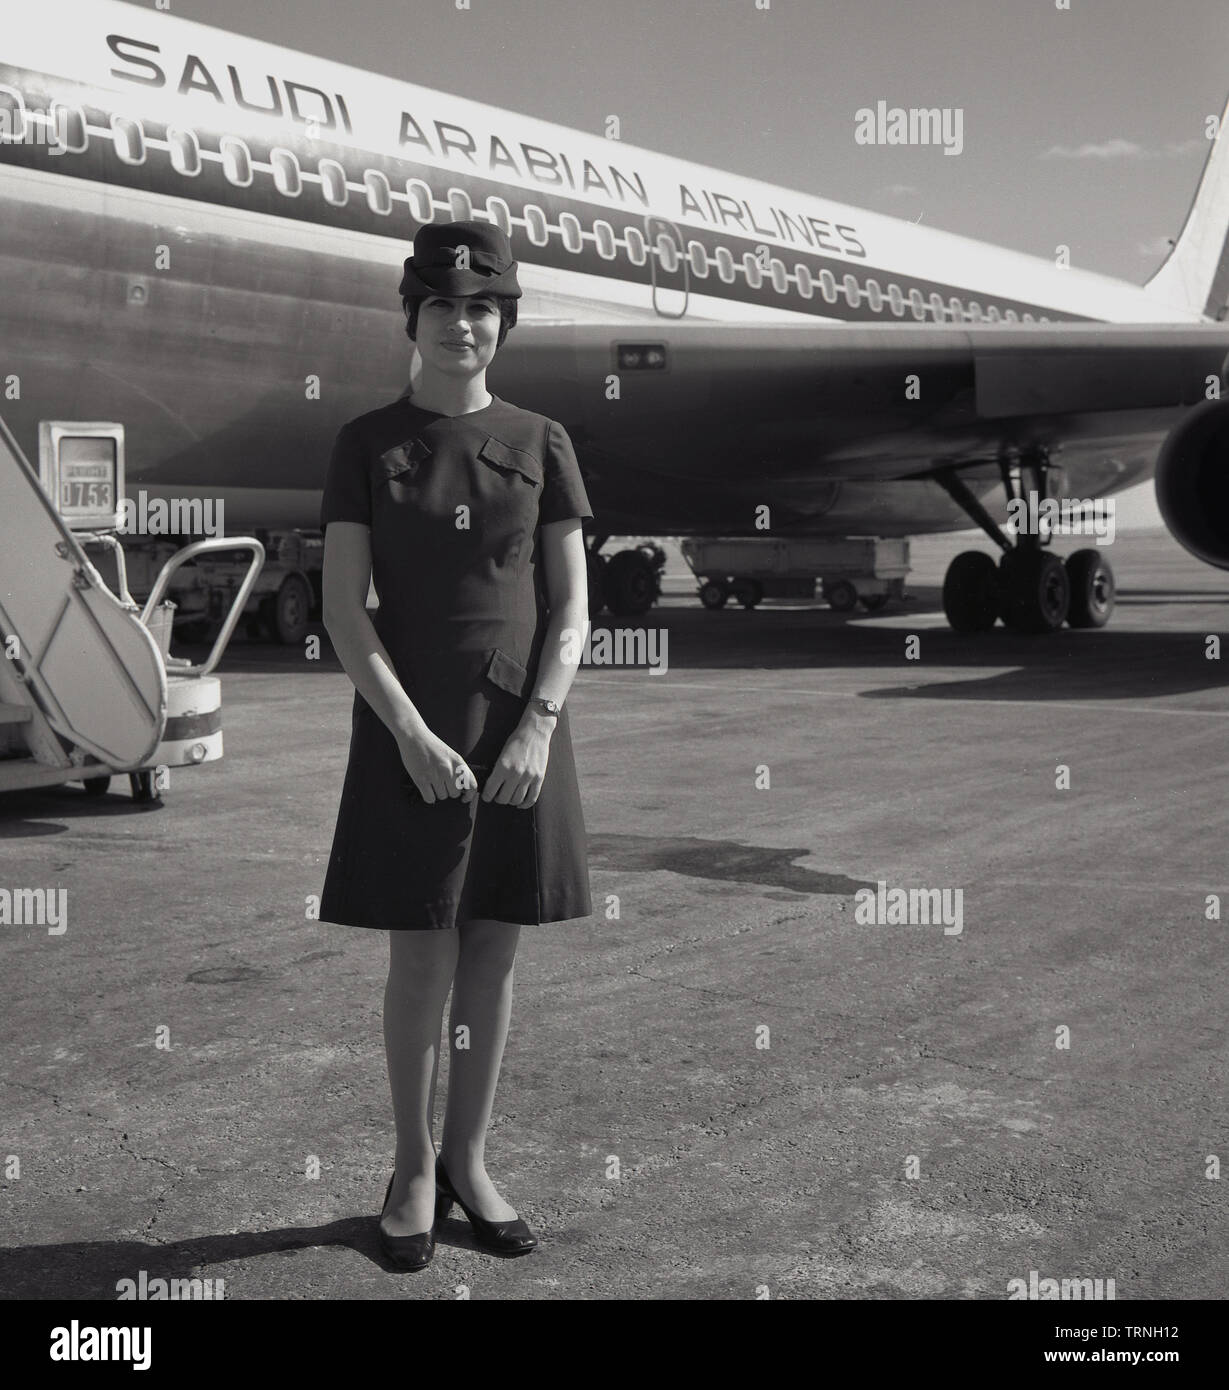 1960s, historical, Uniformed female Air hostess standing outside a Saudi Arabian Airlines jet aircraft, Heathrow airport, London, England, UK. Stock Photo